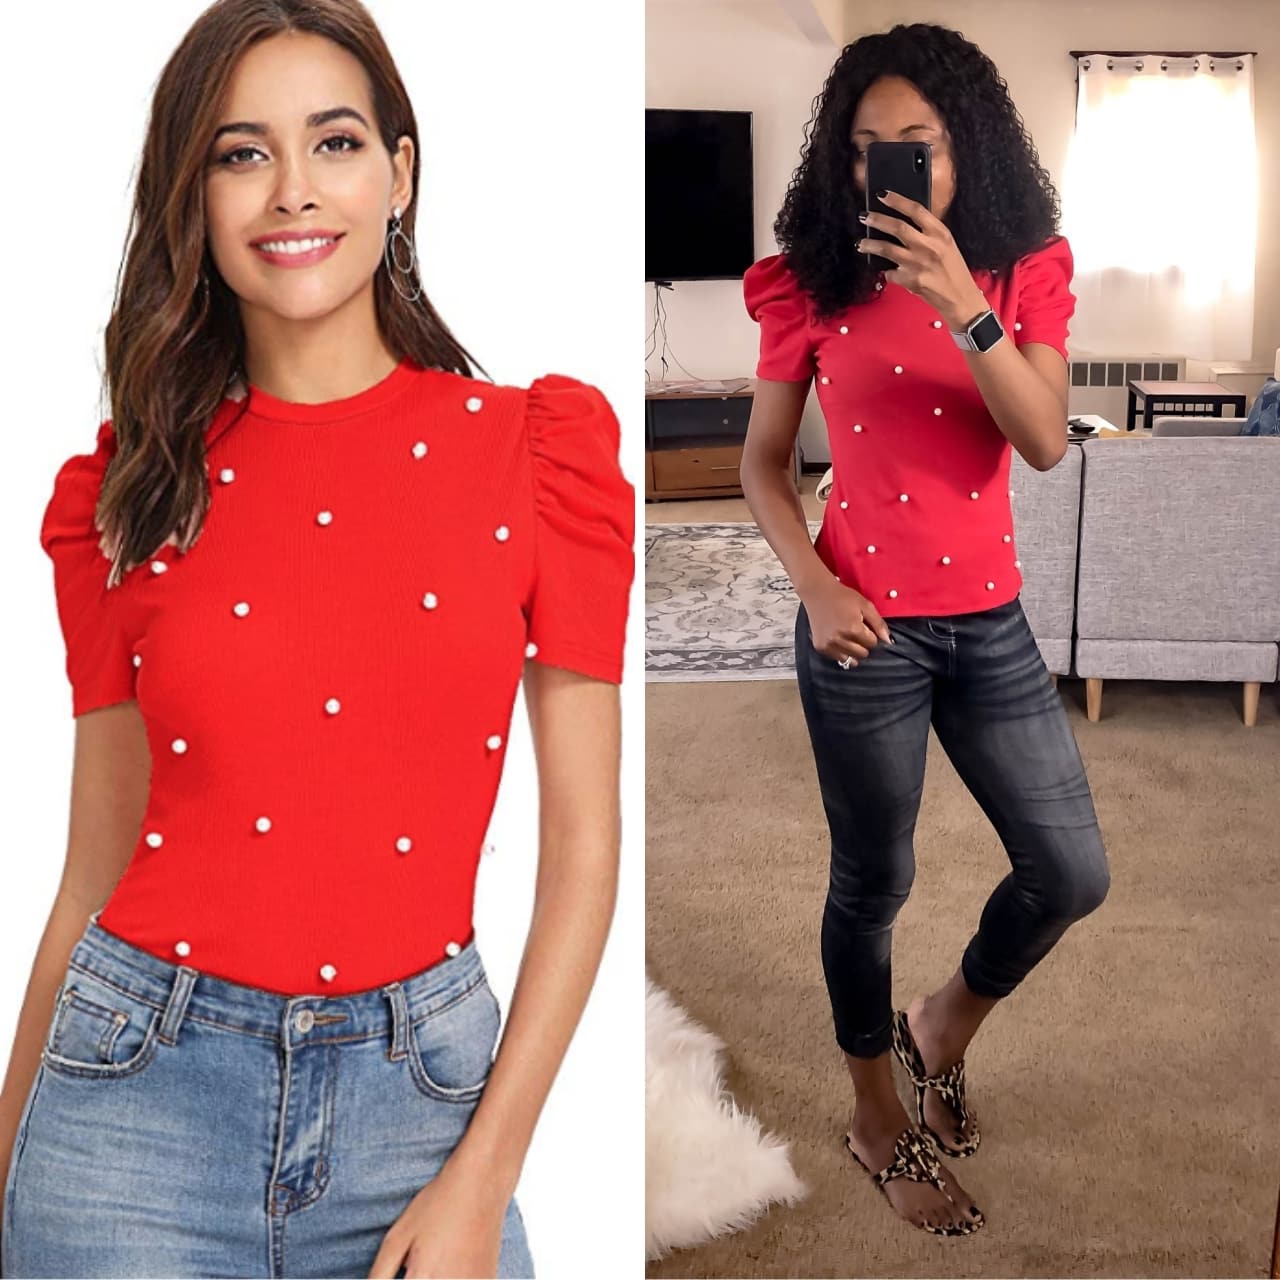 This is the ultimate Amazon clothing haul post with try-on photos sharing Amazon finds hits and misses. And most of these items cost under $20! Keep reading to discover tips on how to maximize your savings on Amazon.